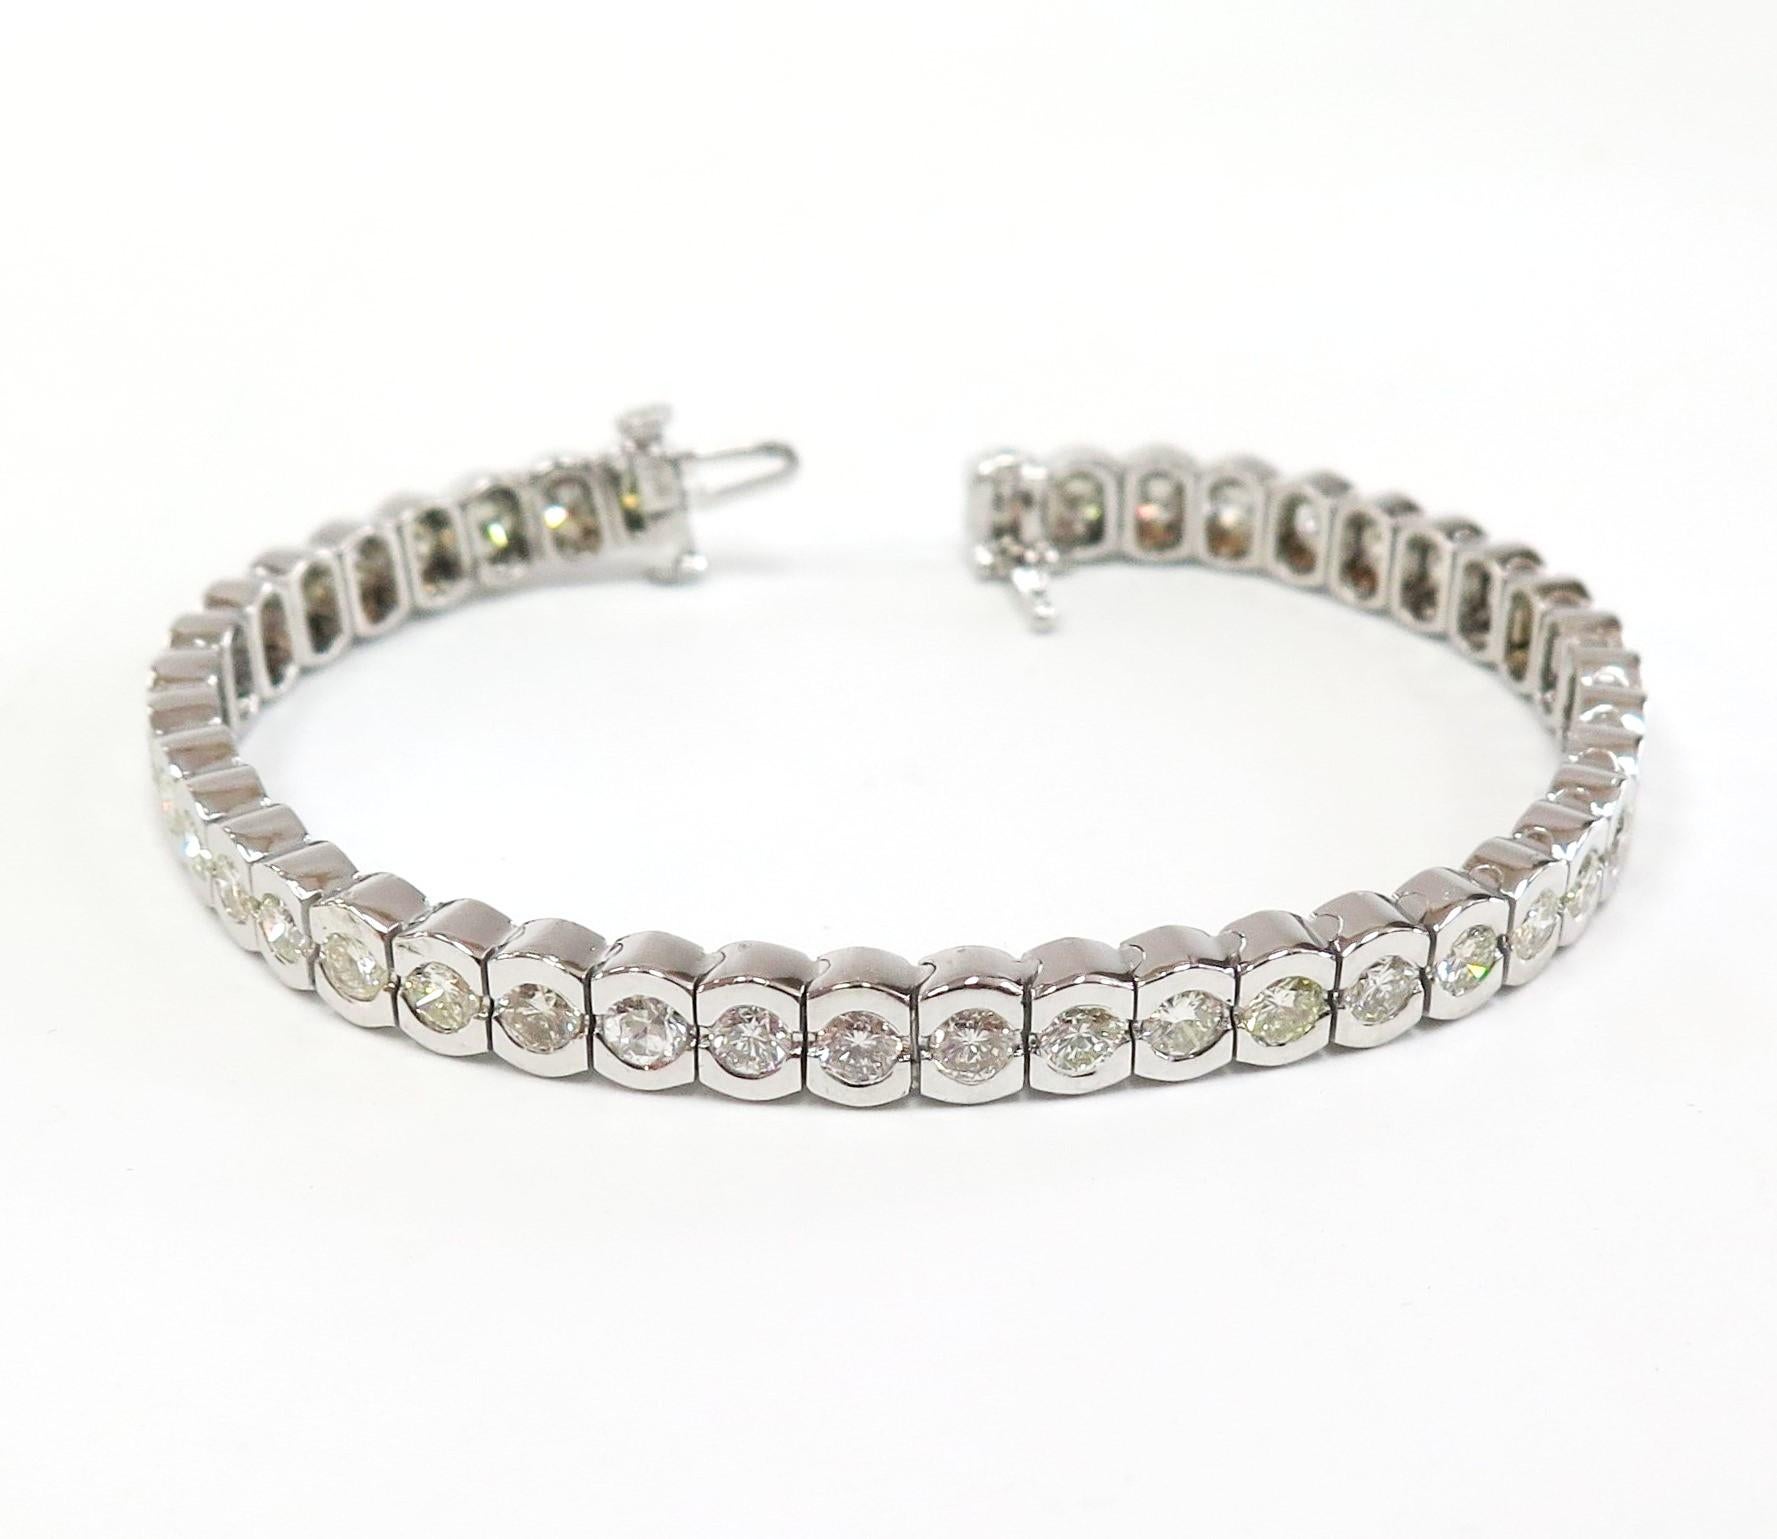 Beautiful 6.30 Carat total Diamond Weight tennis bracelet in unique scalloped 14 karat white gold setting. 

Diamonds: Color: Near Colorless, Clarity: VS/SI.
7 Inches in length
Tight lock with underneath safety.